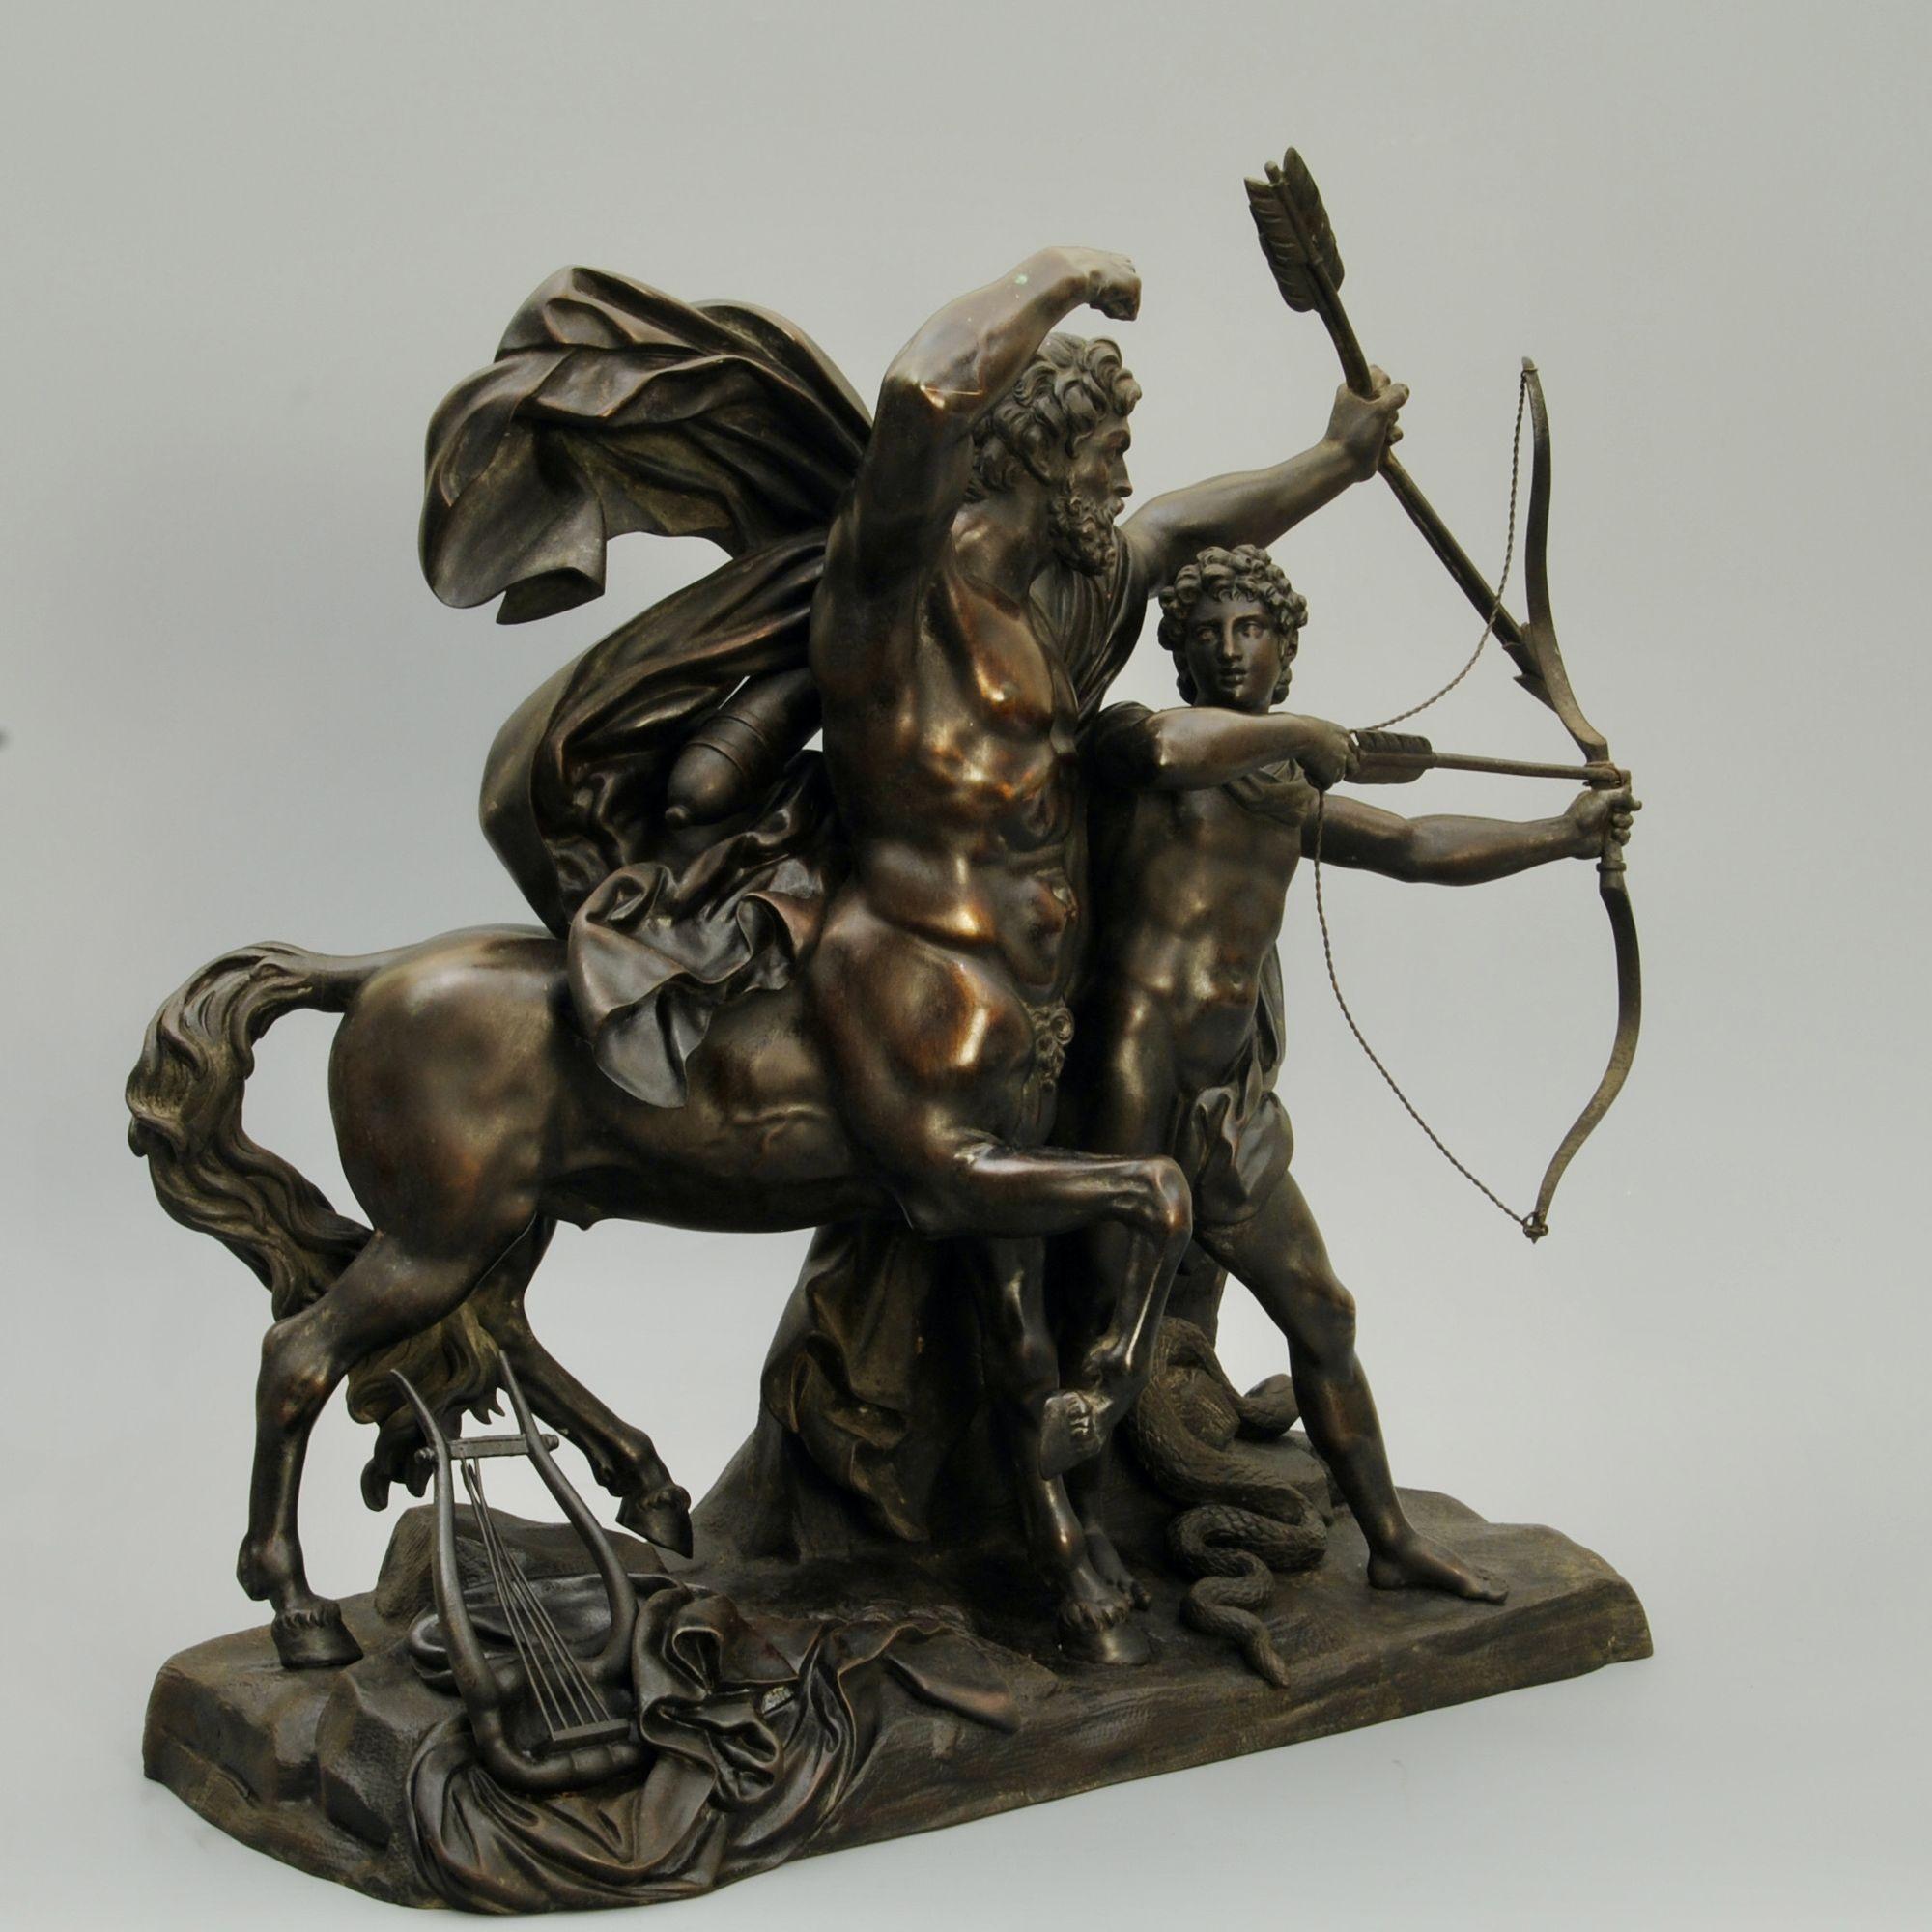 A fine grand tour 19th century bronze group of The education of Achilles.Chiron the centaur is teaching Achilles in the skill of using a bow.
Well patinated and a good quality casting, after the original by Francois Rude.